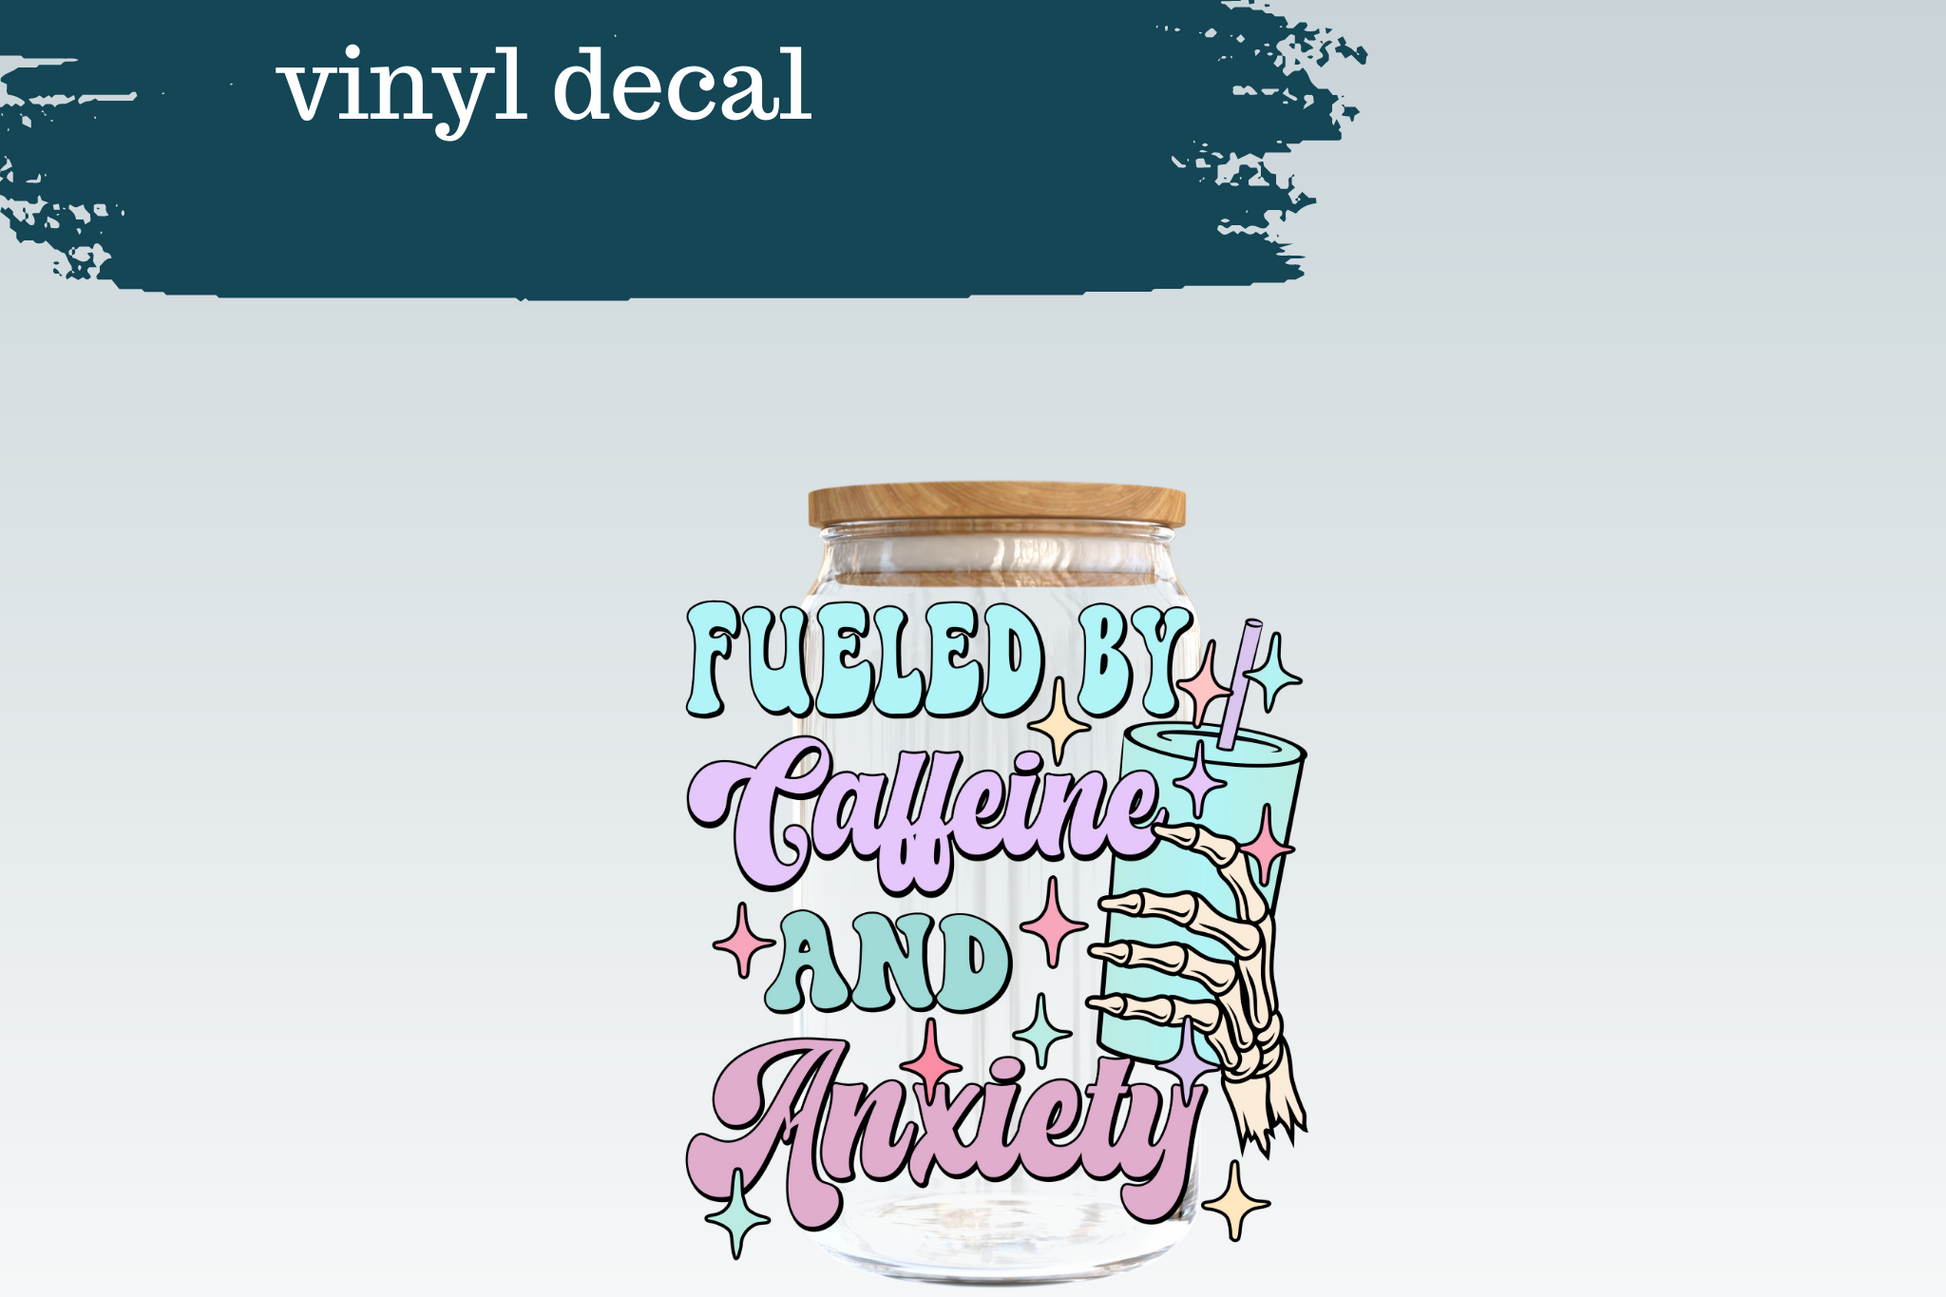 Fueled by Caffeine & Anxiety | Vinyl Decal